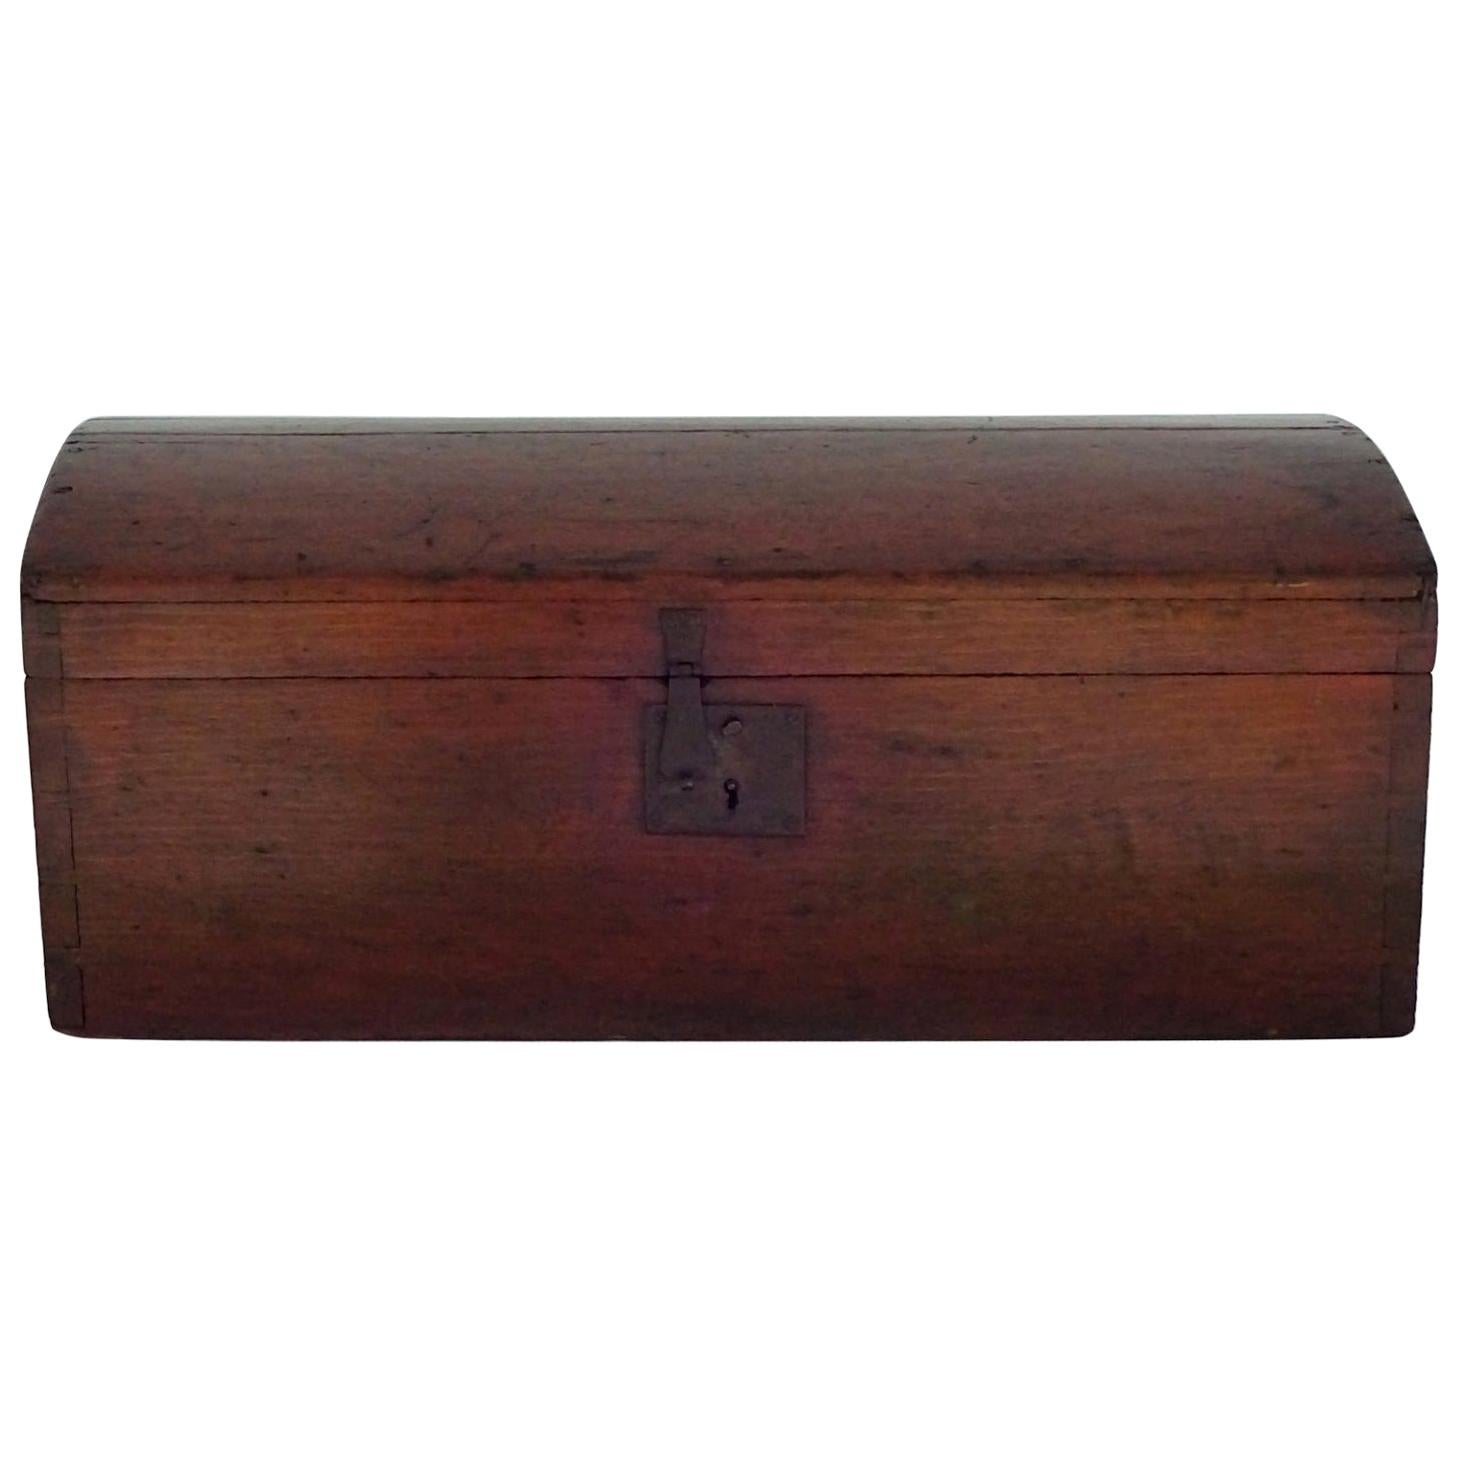 19th Century American Pine-Domed Top Storage Box For Sale